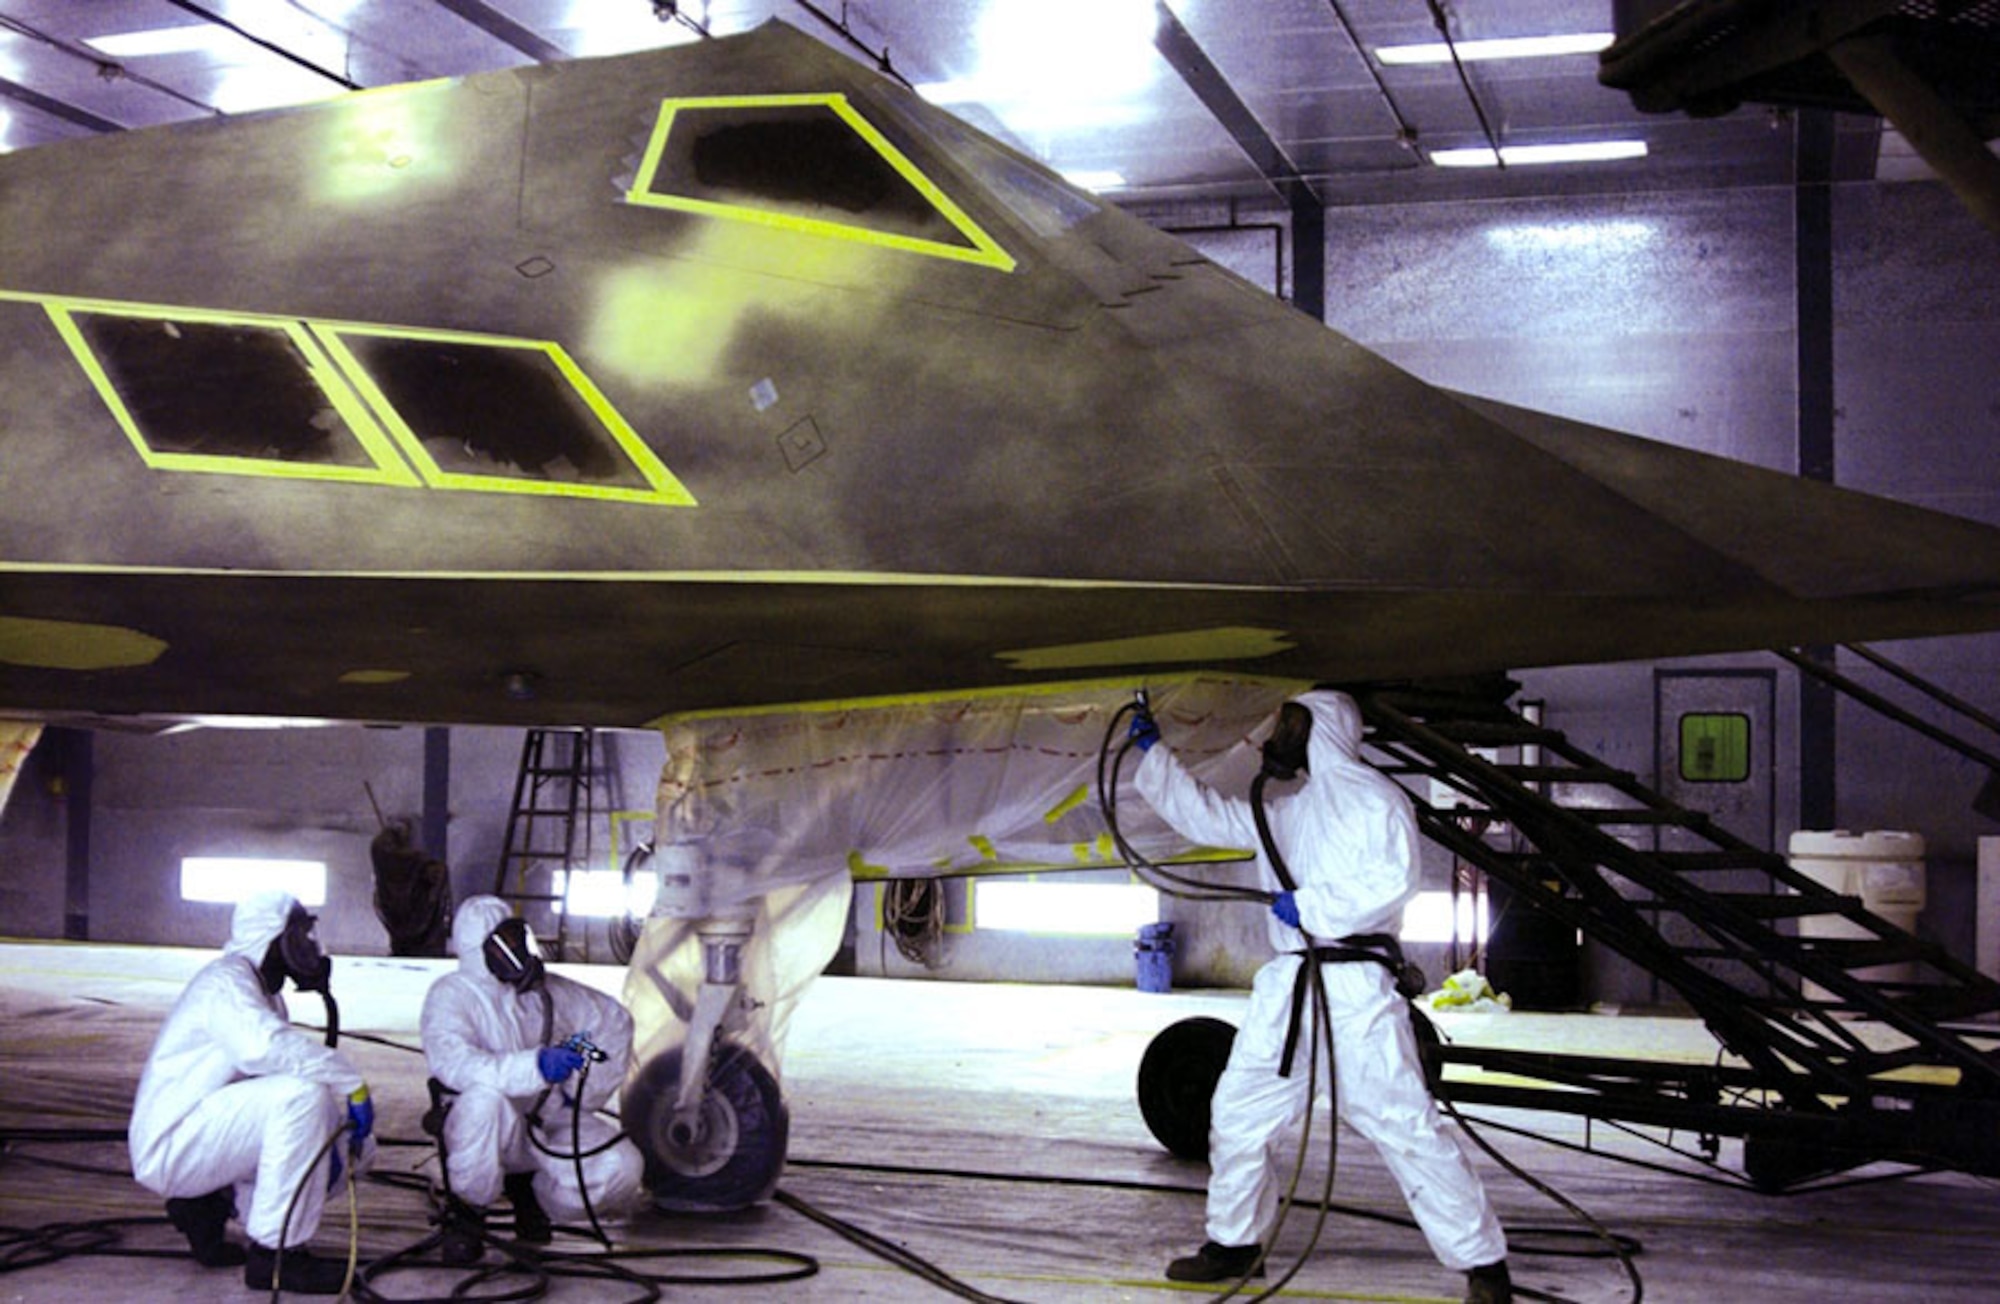 HOLLOMAN AIR FORCE BASE, N.M. -- (Left to right) Staff Sgts. Armond Cornin and Casell Davis, and Airman 1st Class Louis Delgado apply a layer of primer to the underbelly of an F-117 Nighthawk before it is painted gray.  The aircraft will participate in tests aimed at determining the feasibility of using the F-117 during daytime operations.  The airmen are assigned to the 49th Aircraft Maintenance Squadron here.  (U.S. Air Force photo by Airman 1st Class Vanessa LaBoy)